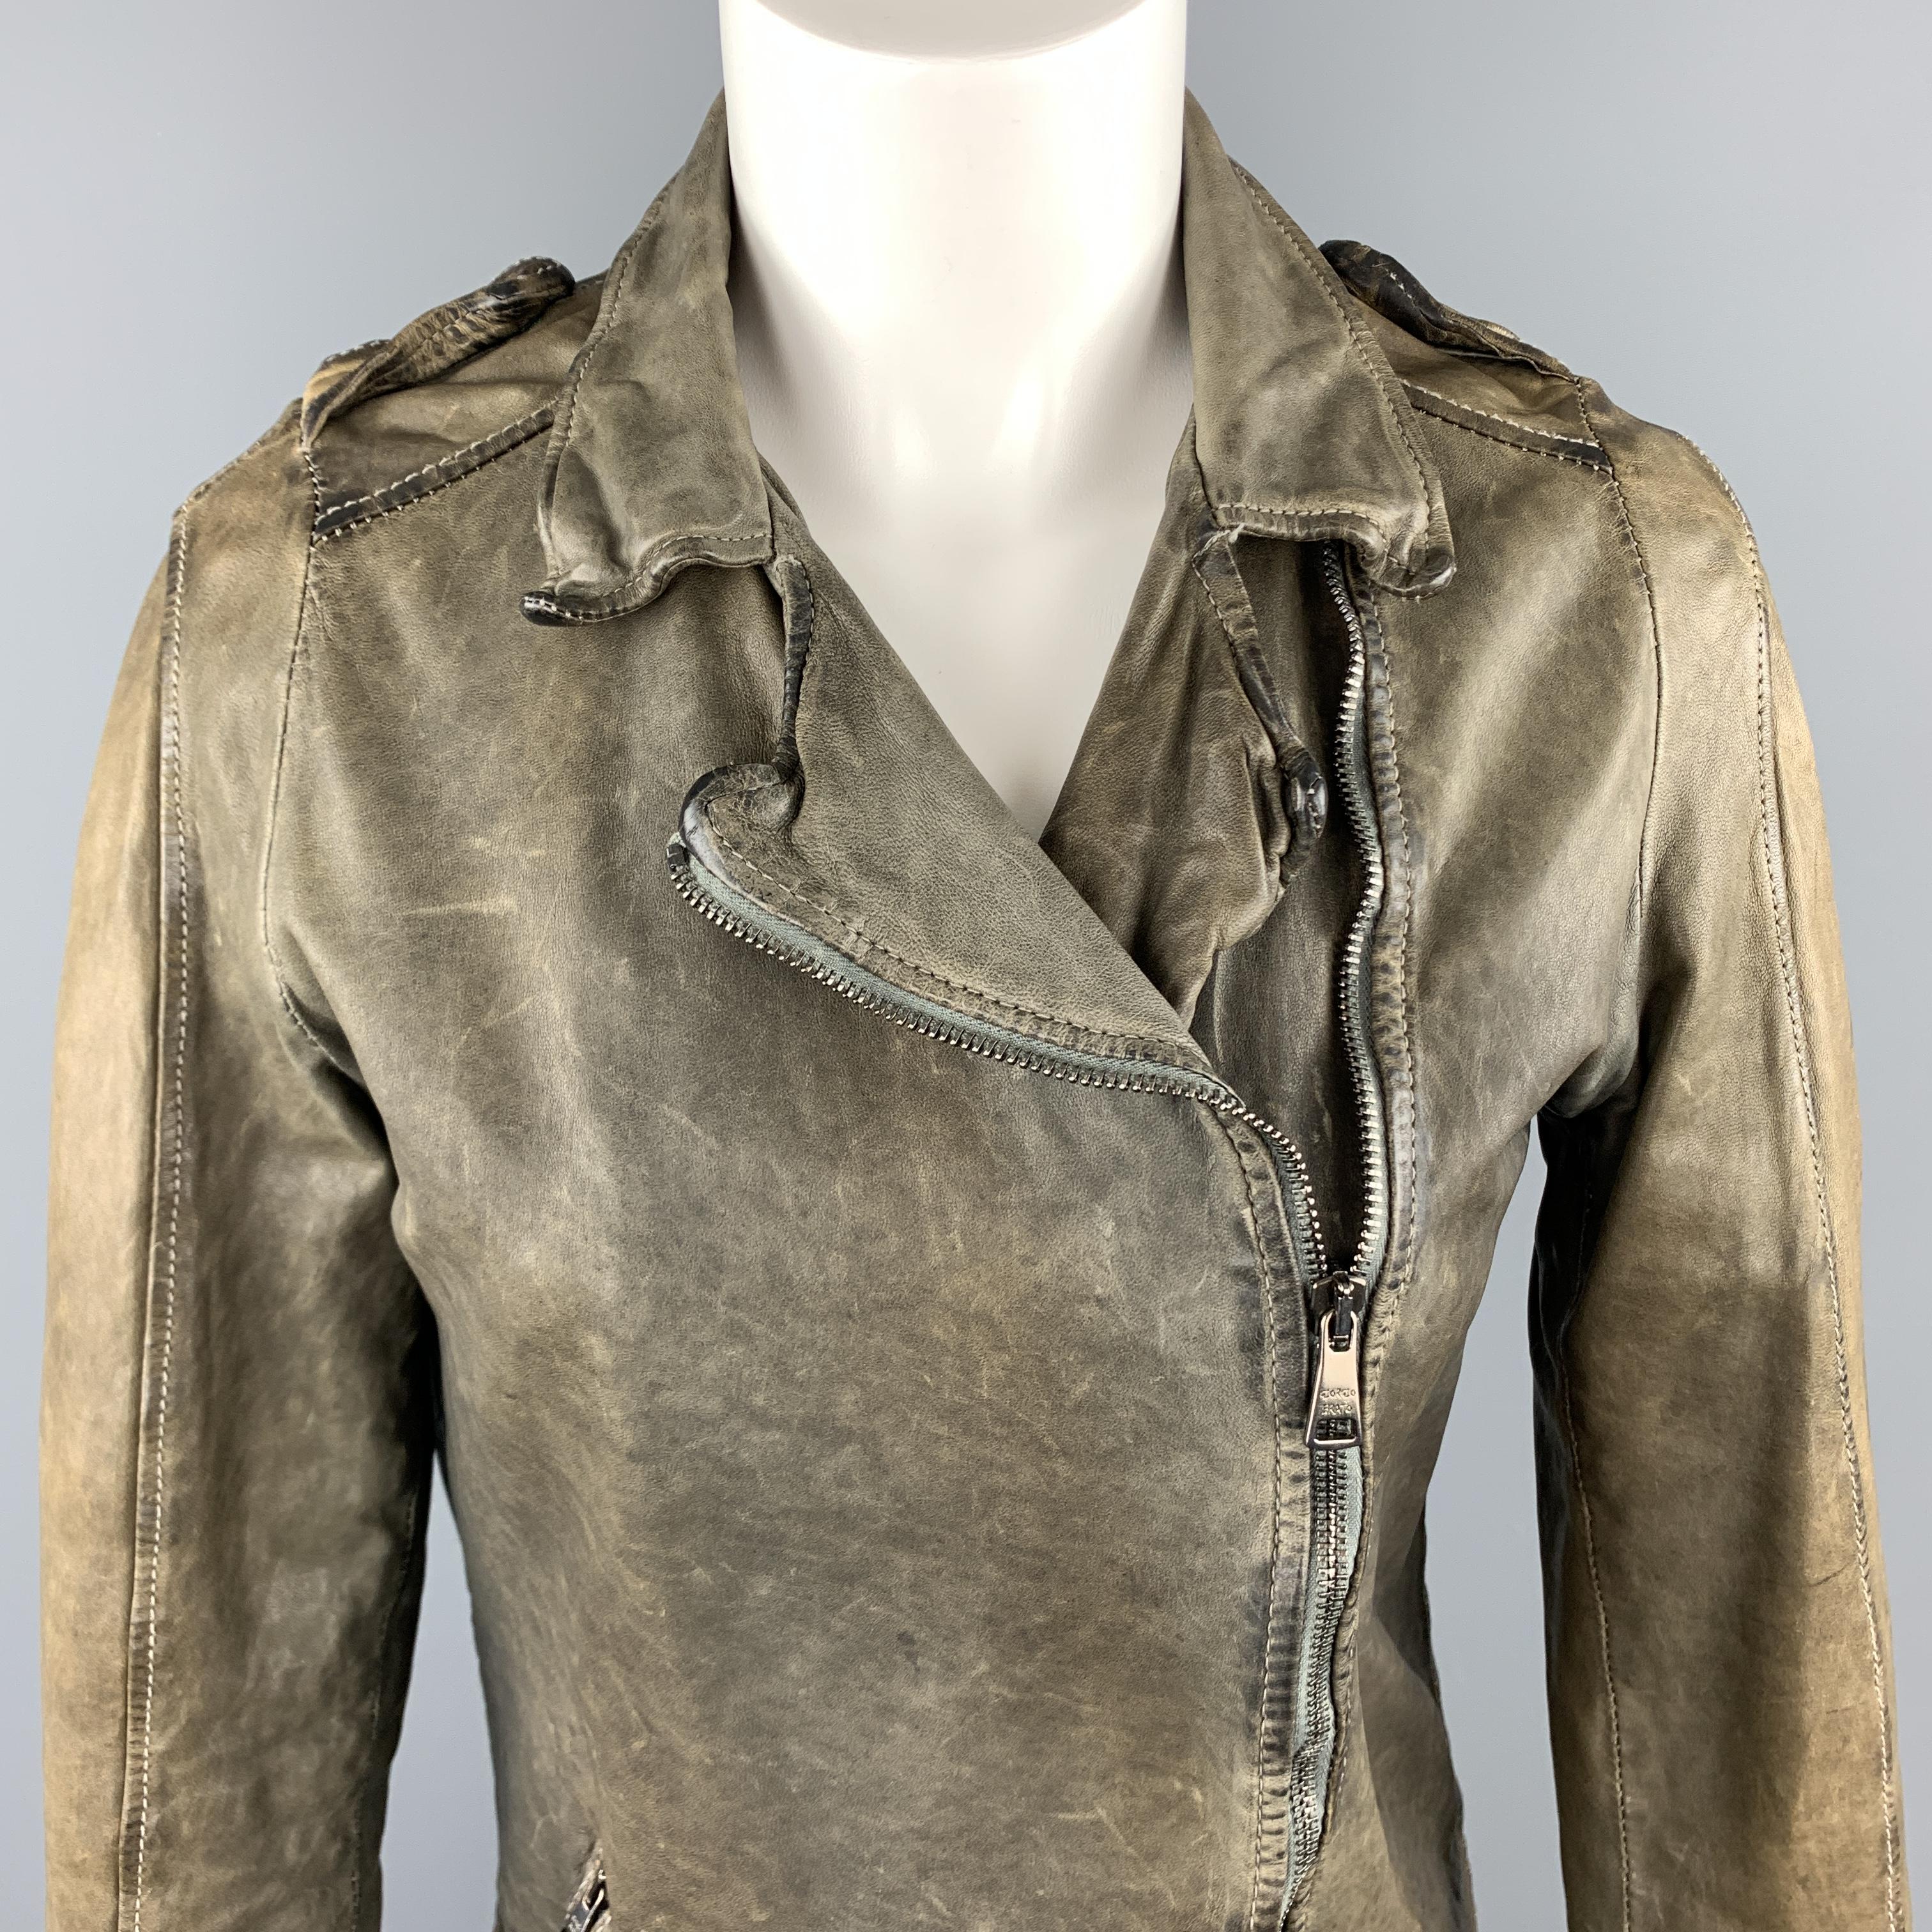 GIORGIO BRATO biker jacket comes in distressed vegetable tanned leather with a double breasted zip front, epaulets, and pointed collar. Hand Made in Italy.

Excellent Pre-Owned Condition.
Marked: IT 40
Original Retail Price: